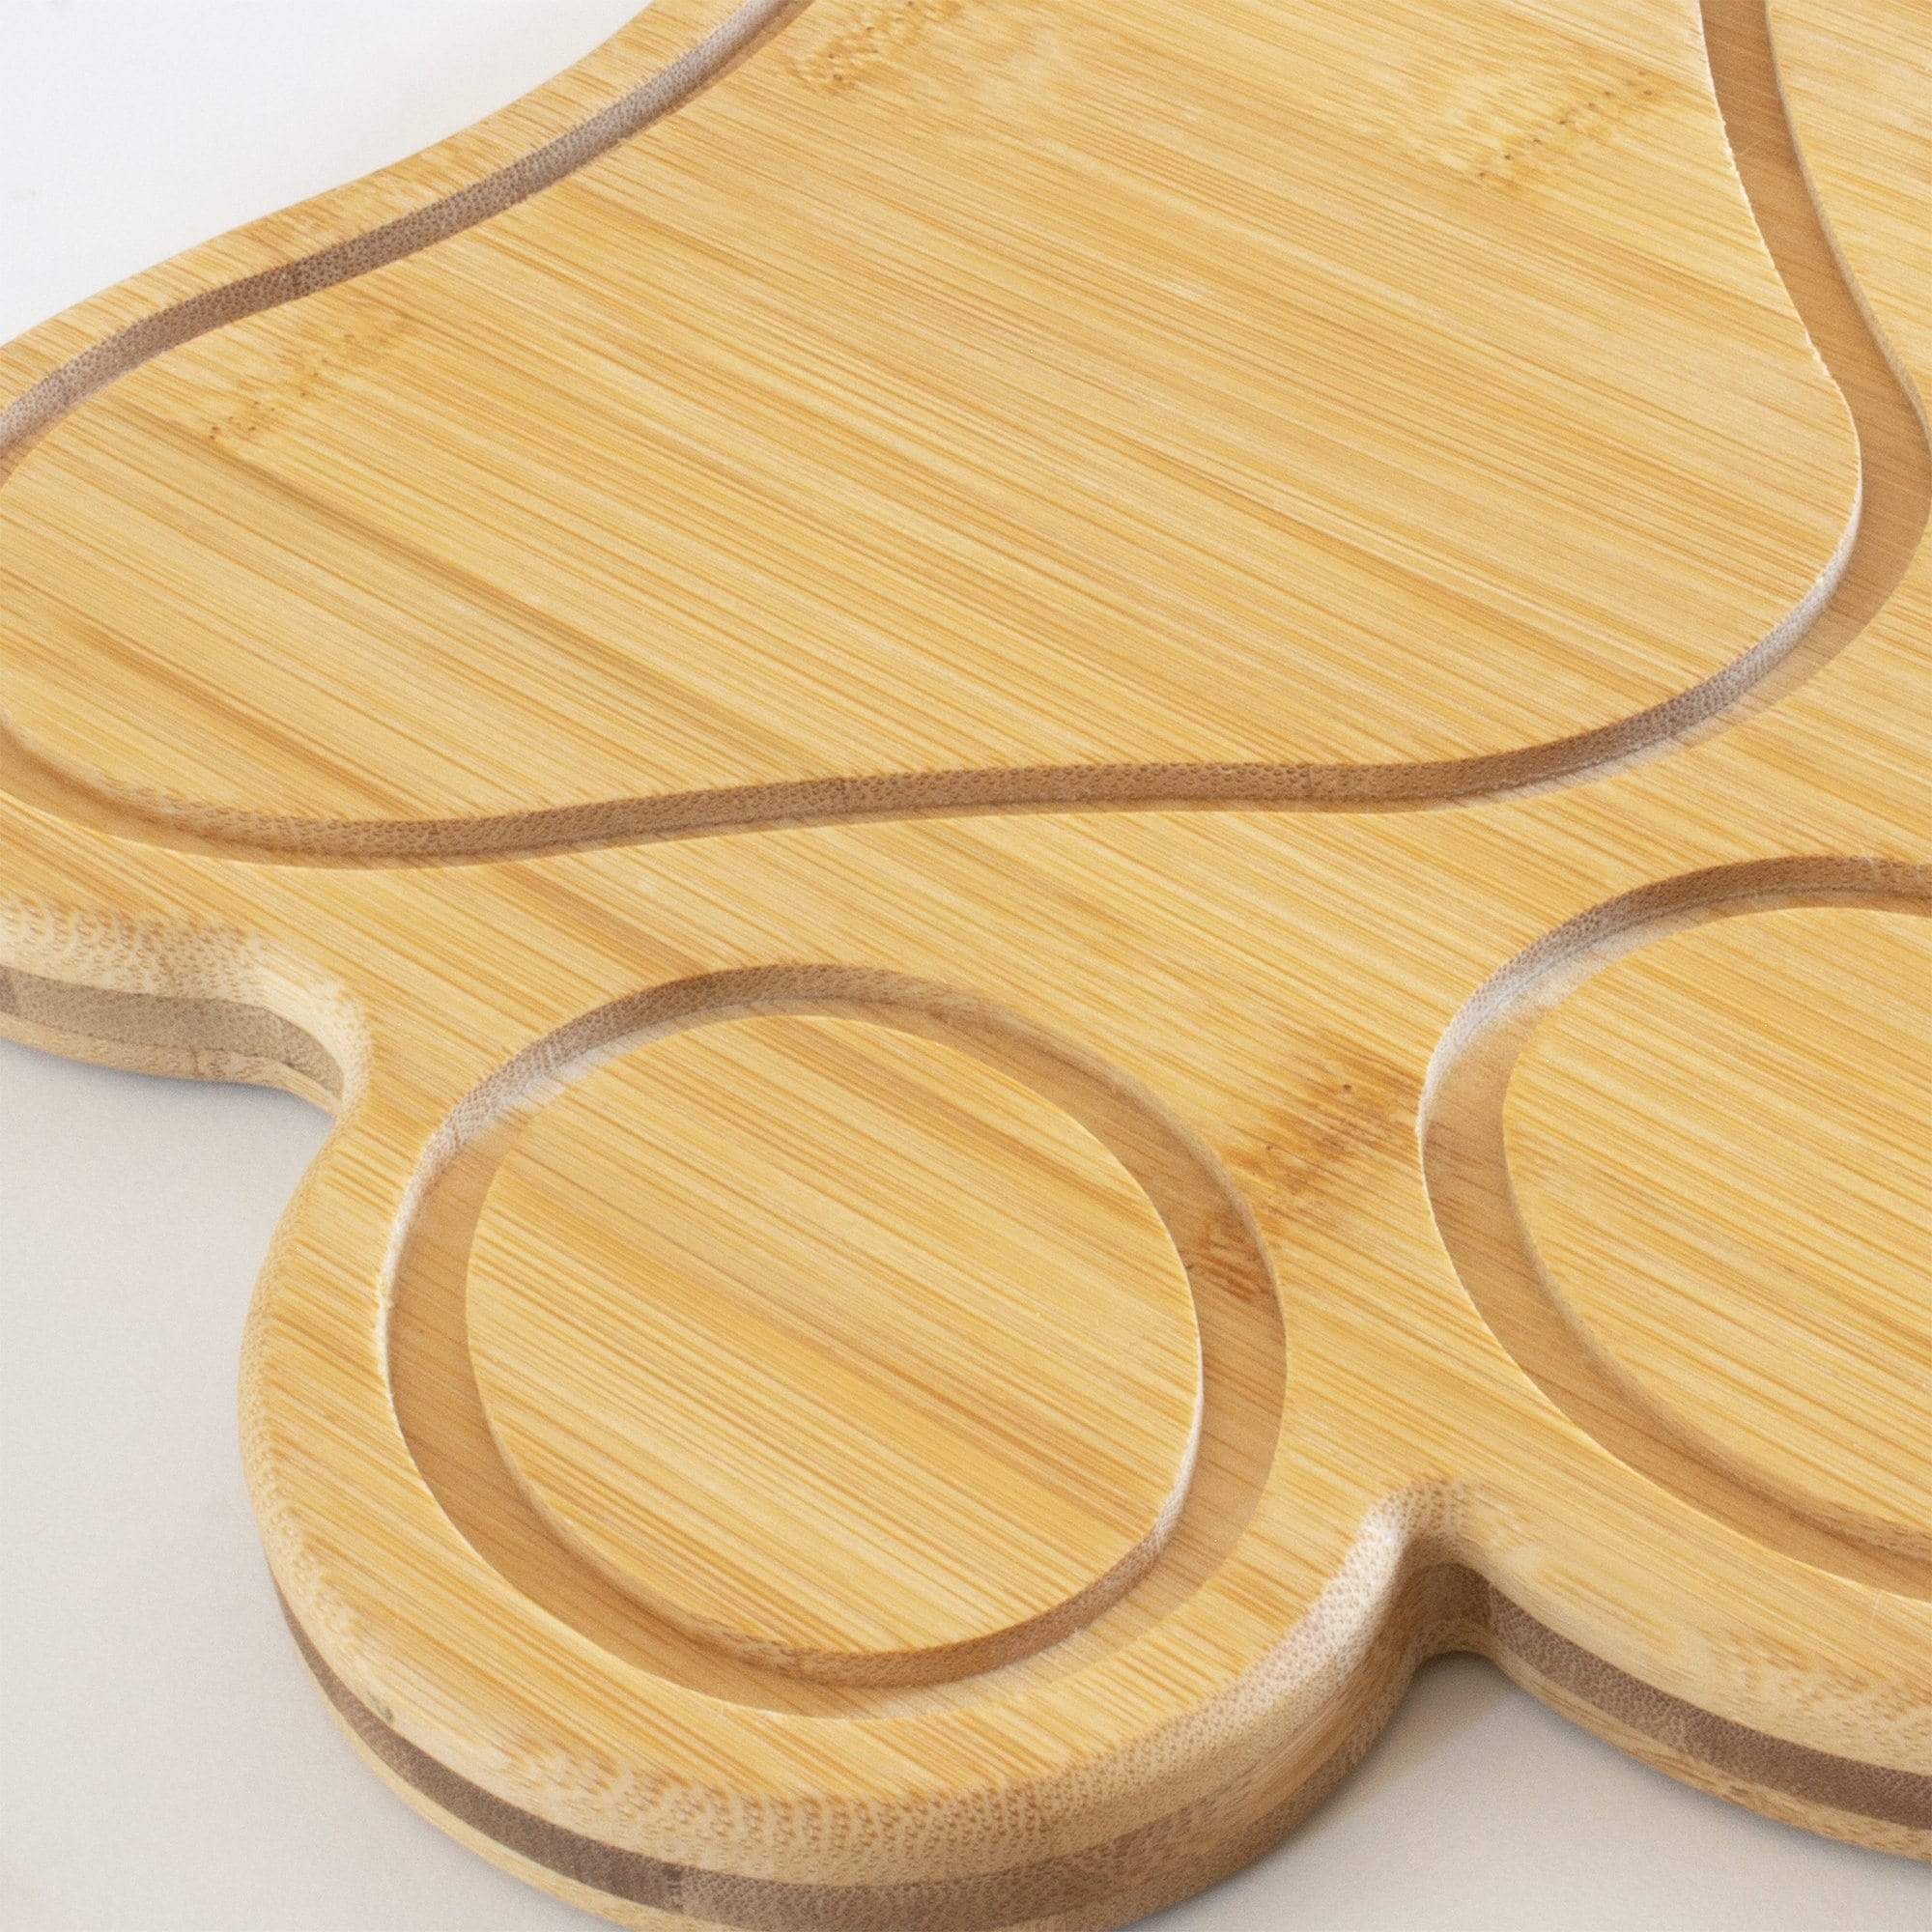 https://totallybamboo.com/cdn/shop/products/paw-shaped-serving-and-cutting-board-11-x-10-totally-bamboo-261420.jpg?v=1627996222